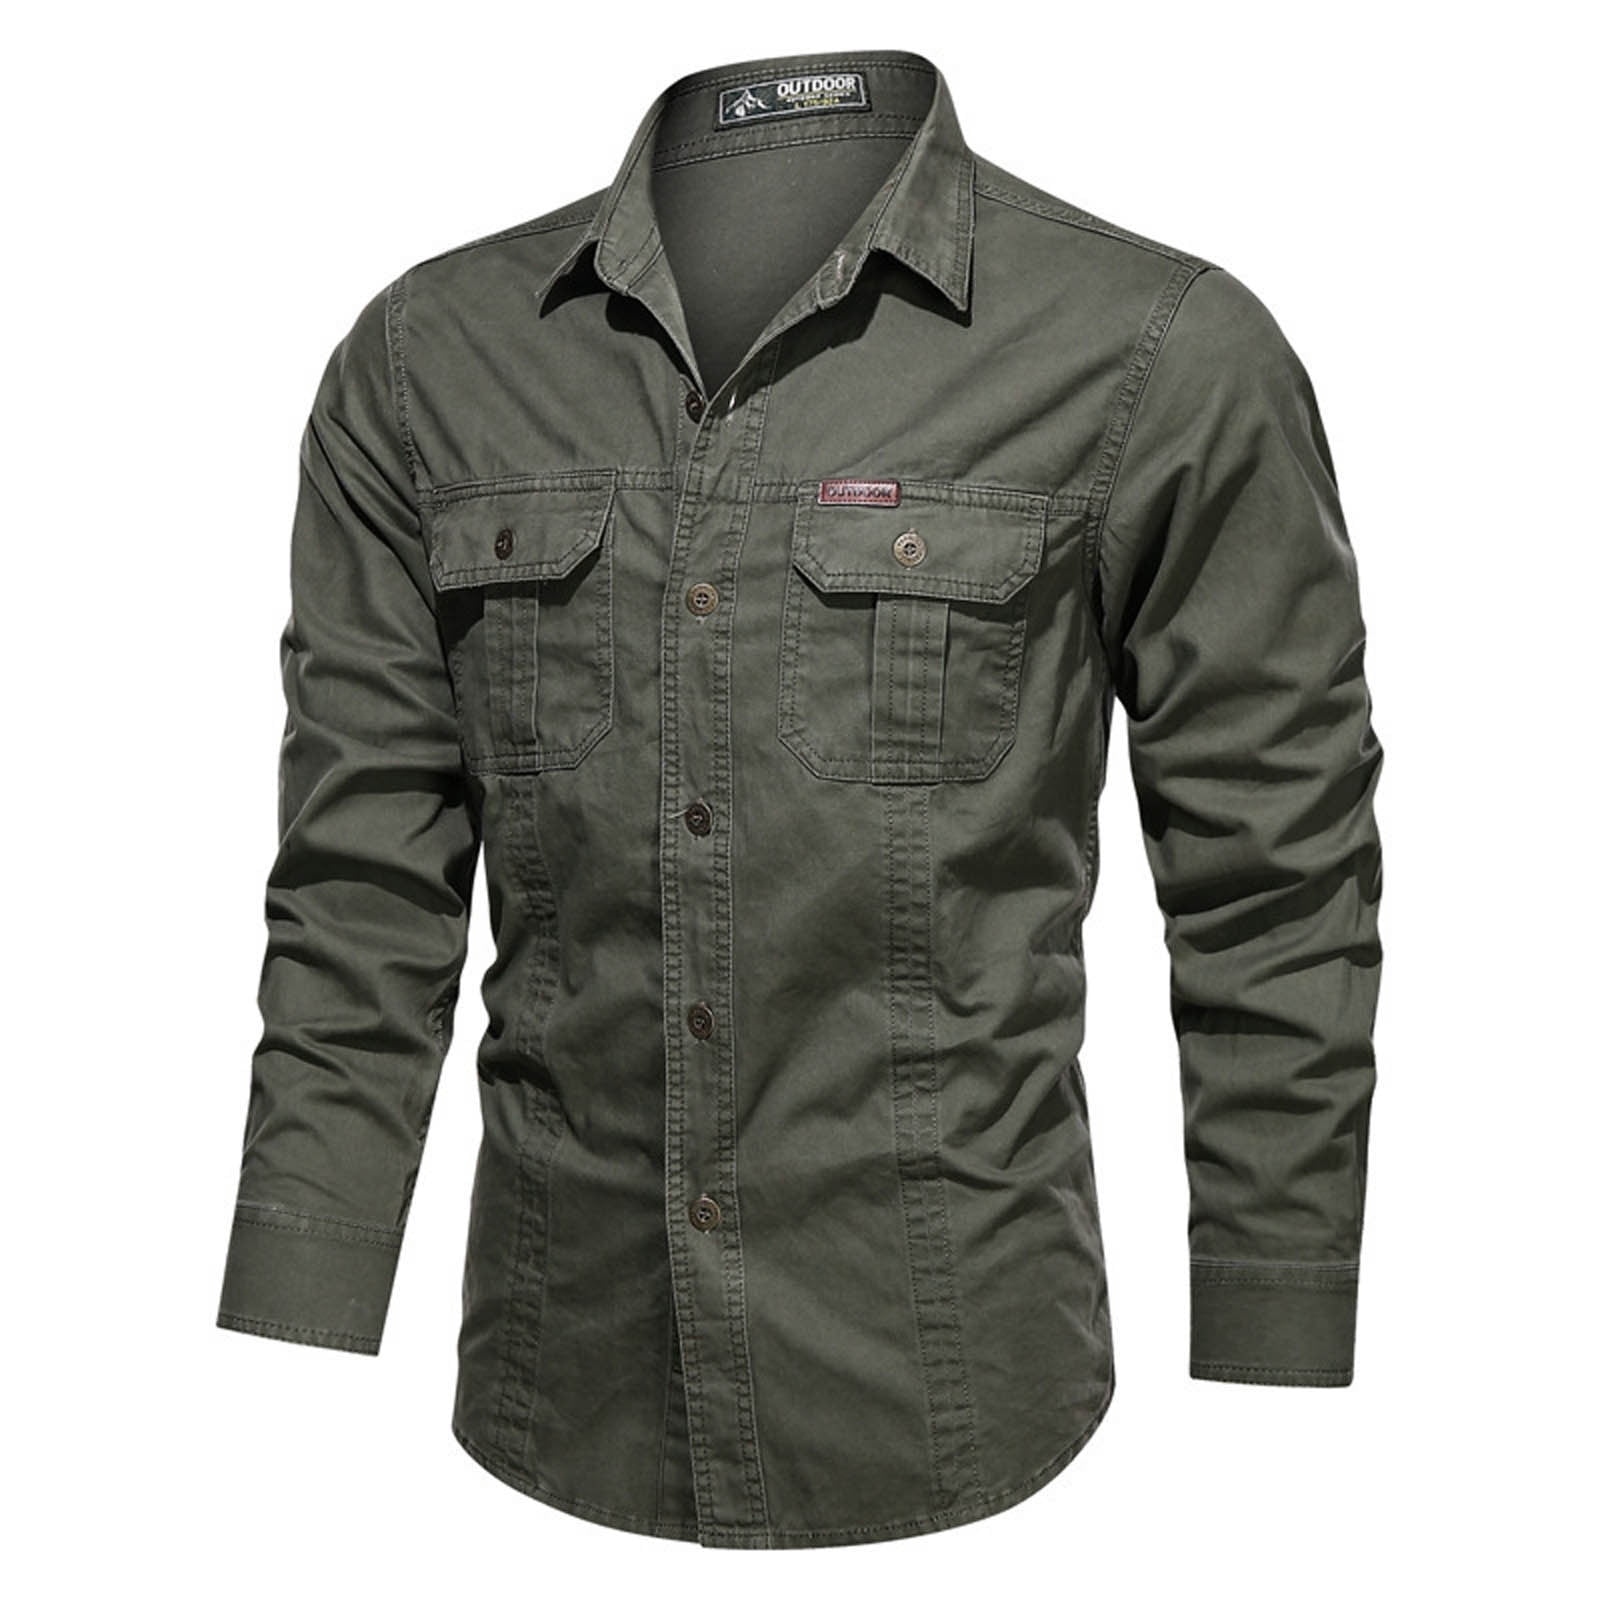 CLOSED] Looking for Military Shirts / Pants for Frontlines